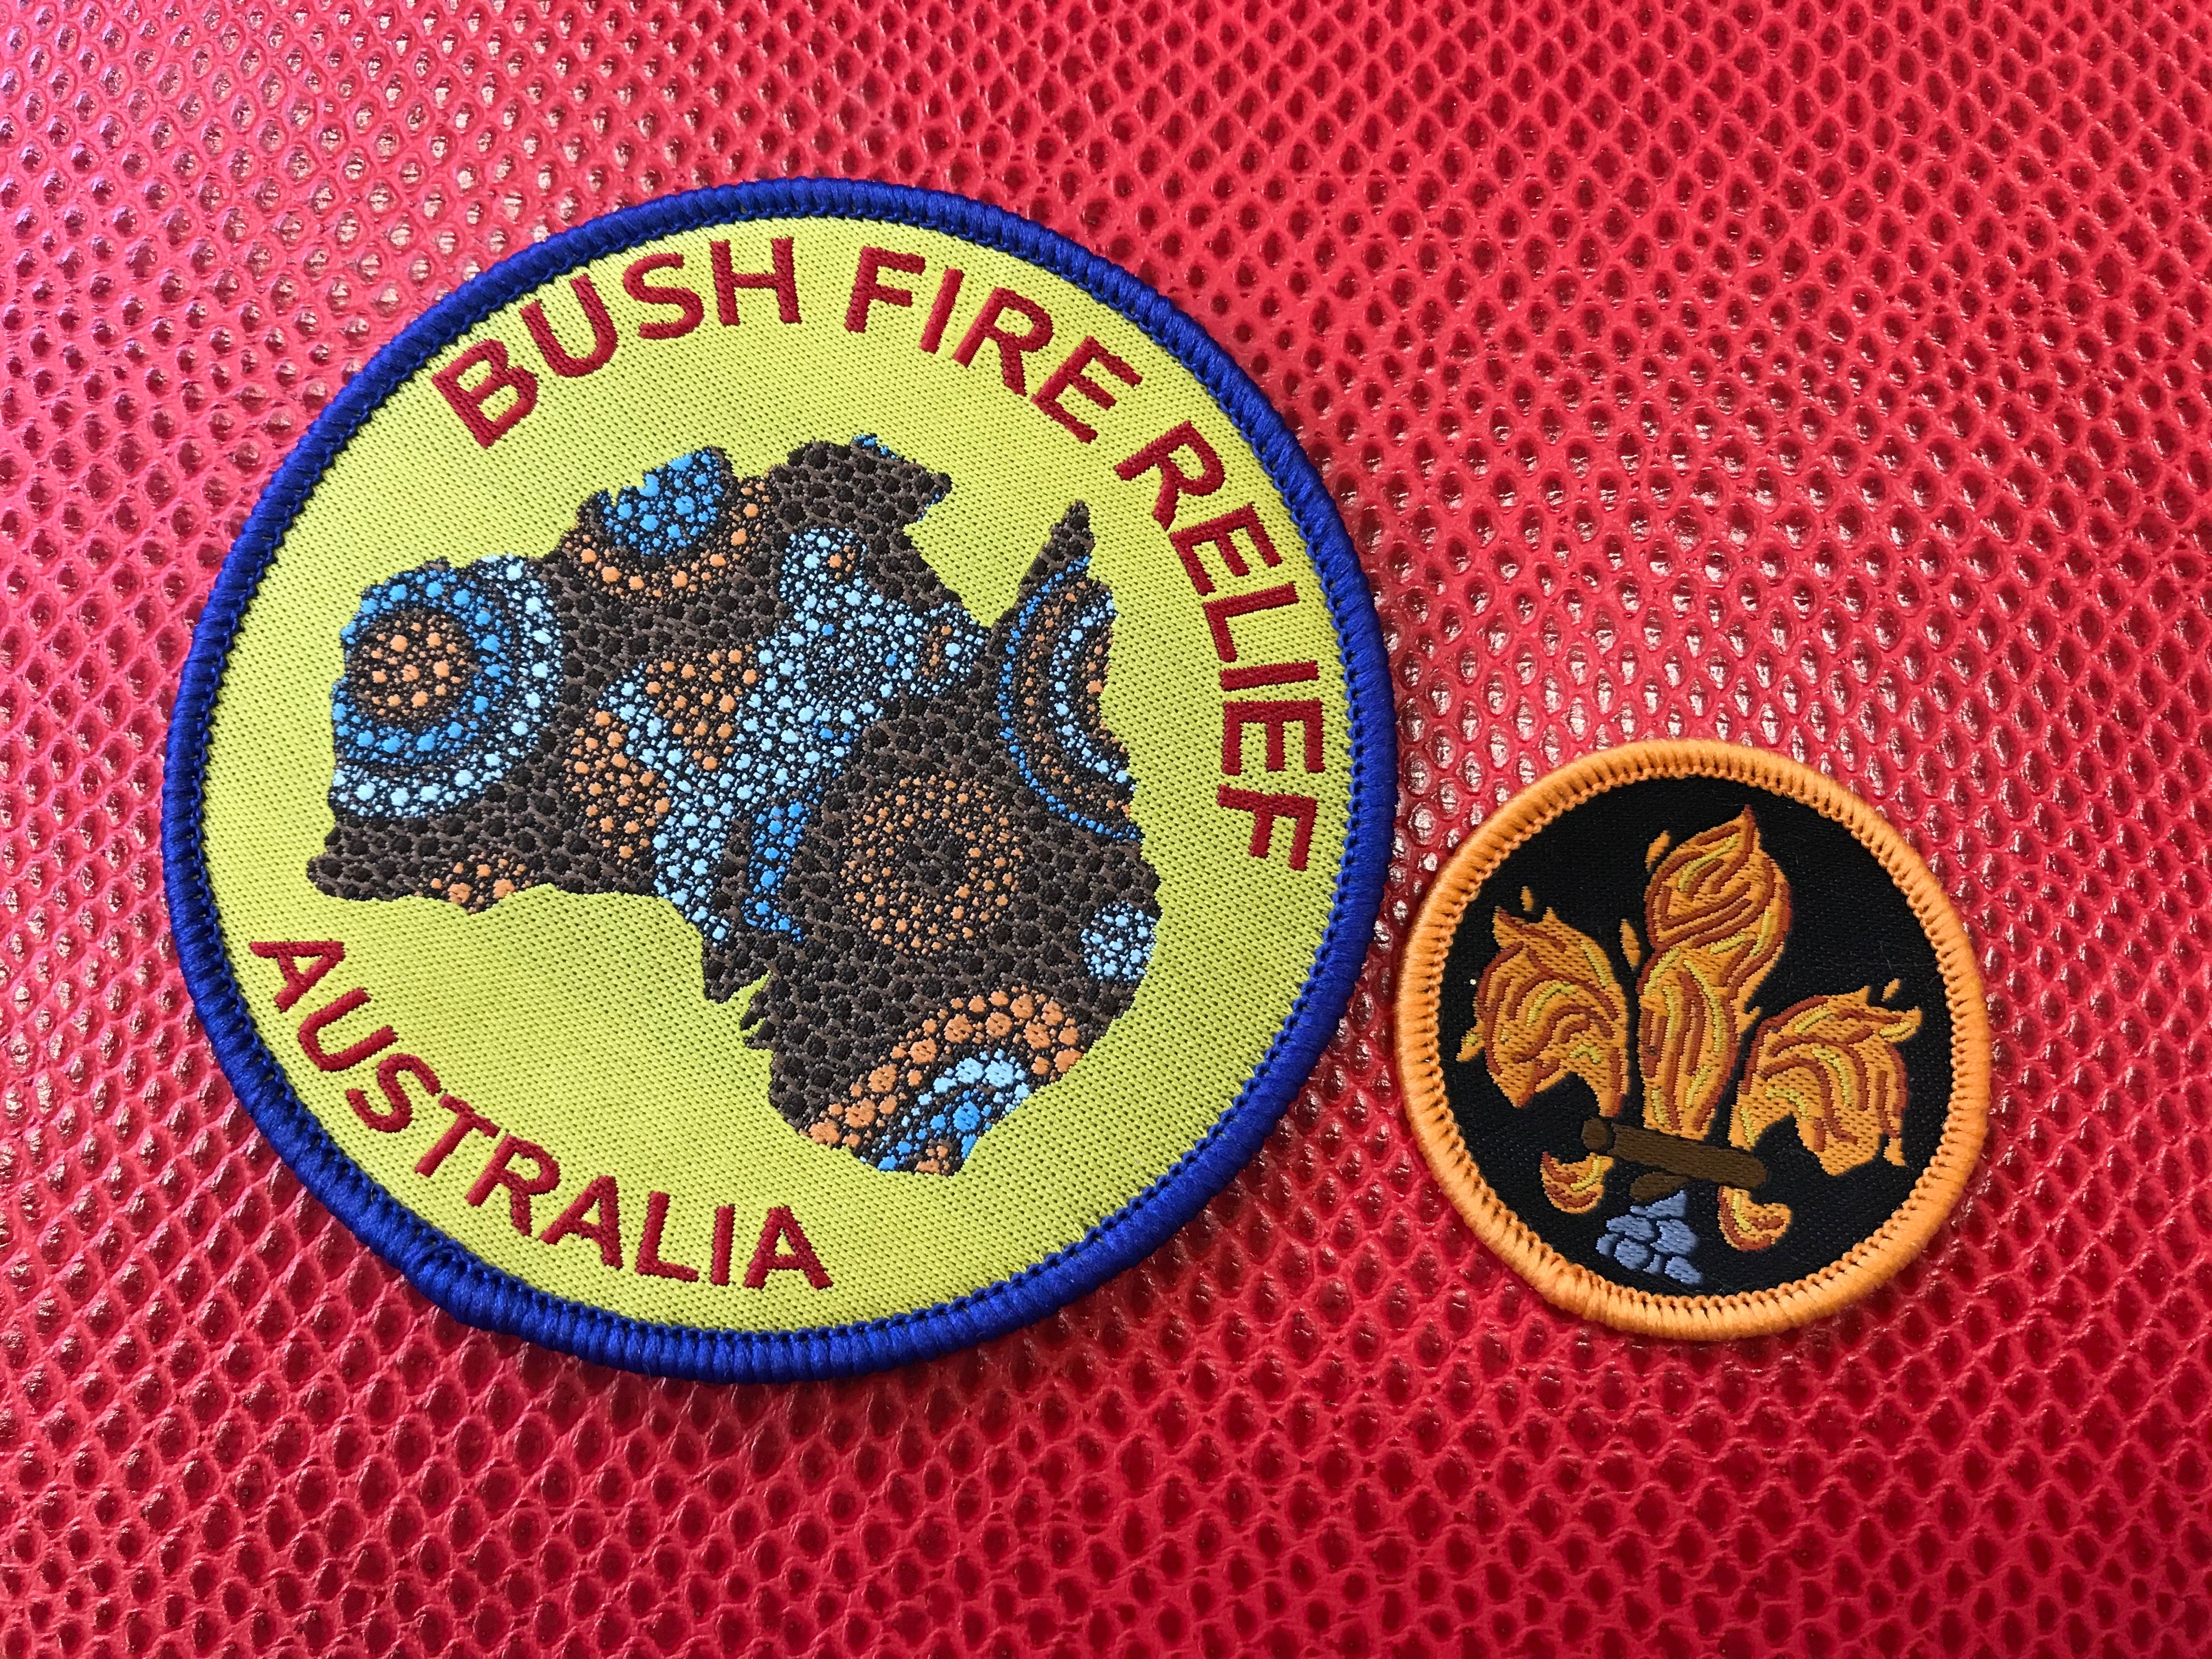 Support the Bush Fire Cause